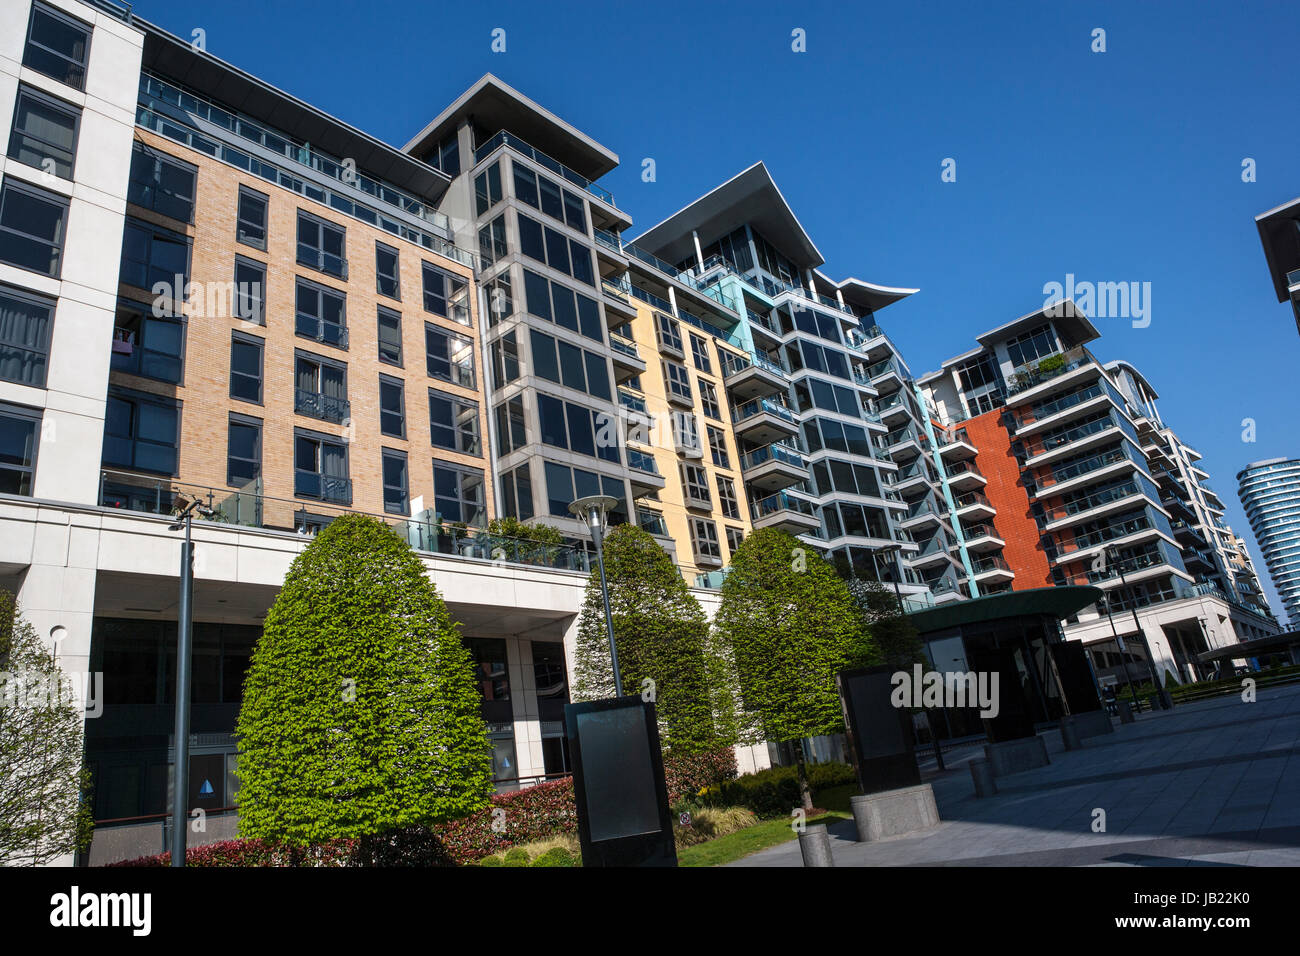 Apartment Buildings, Imperial Wharf, Fulham, London Stock Photo